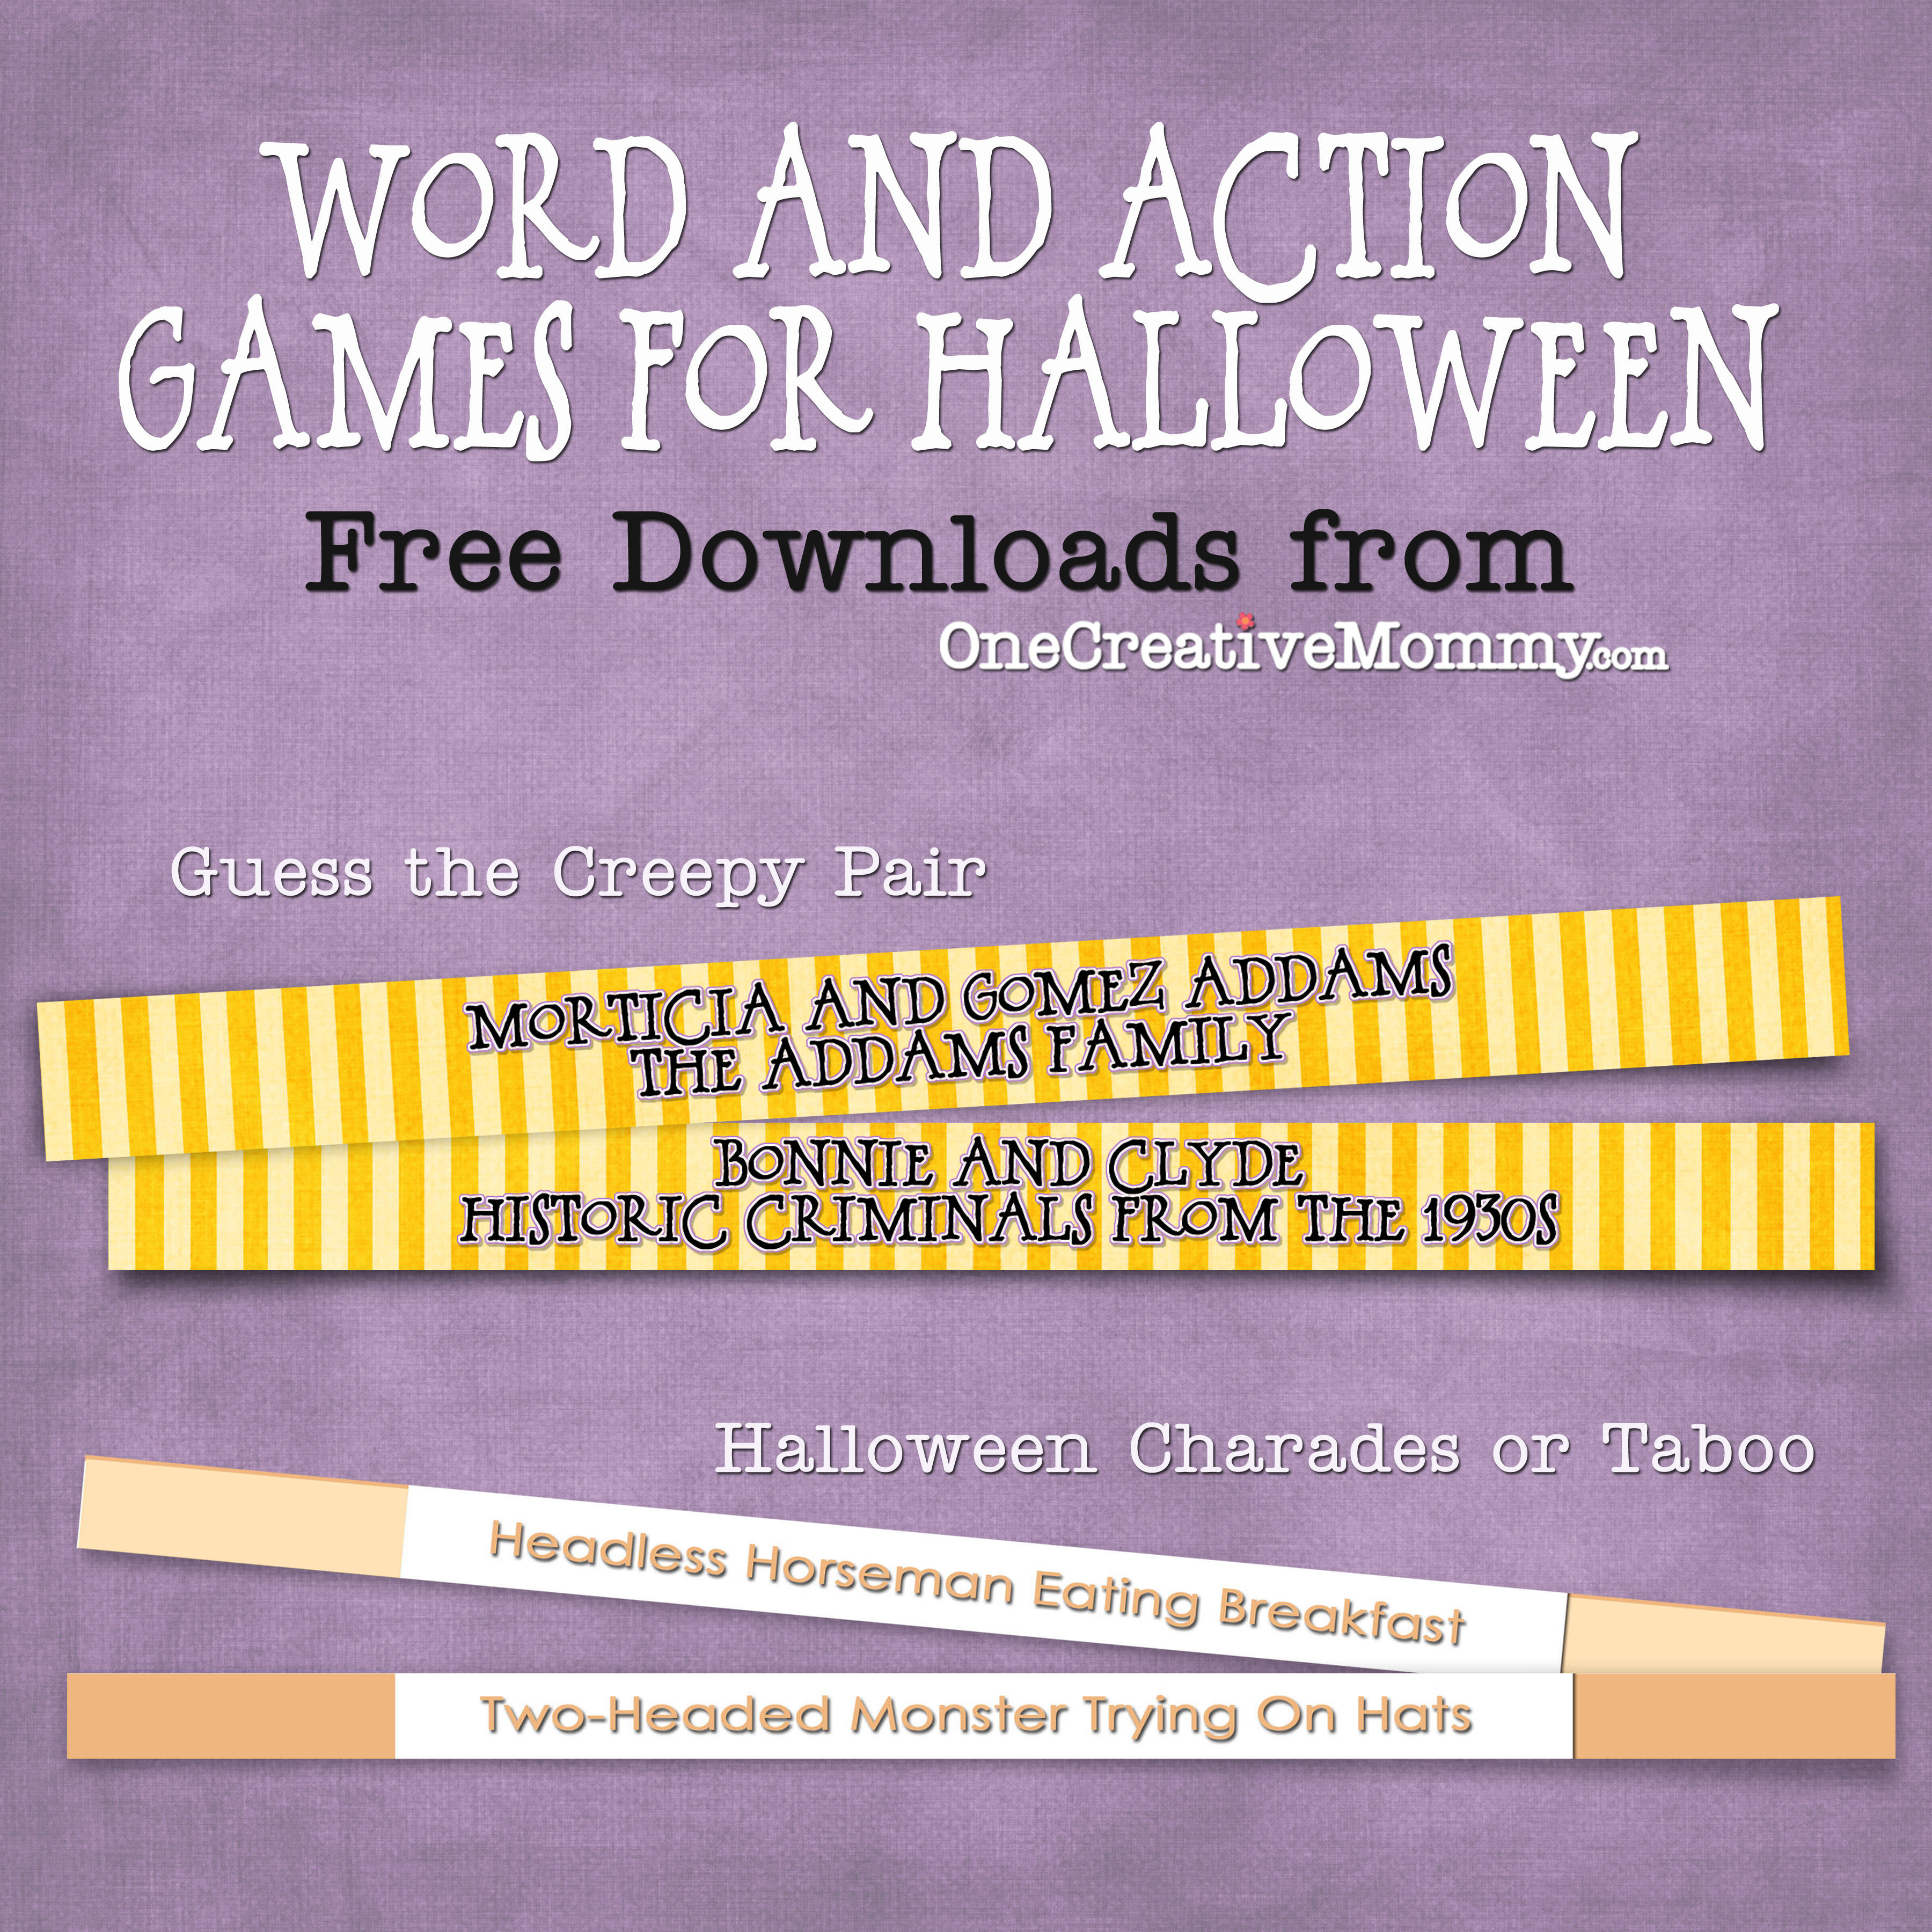 Halloween Party Games For Kids And Grownups, Too! - Onecreativemommy - Free Printable Halloween Party Games